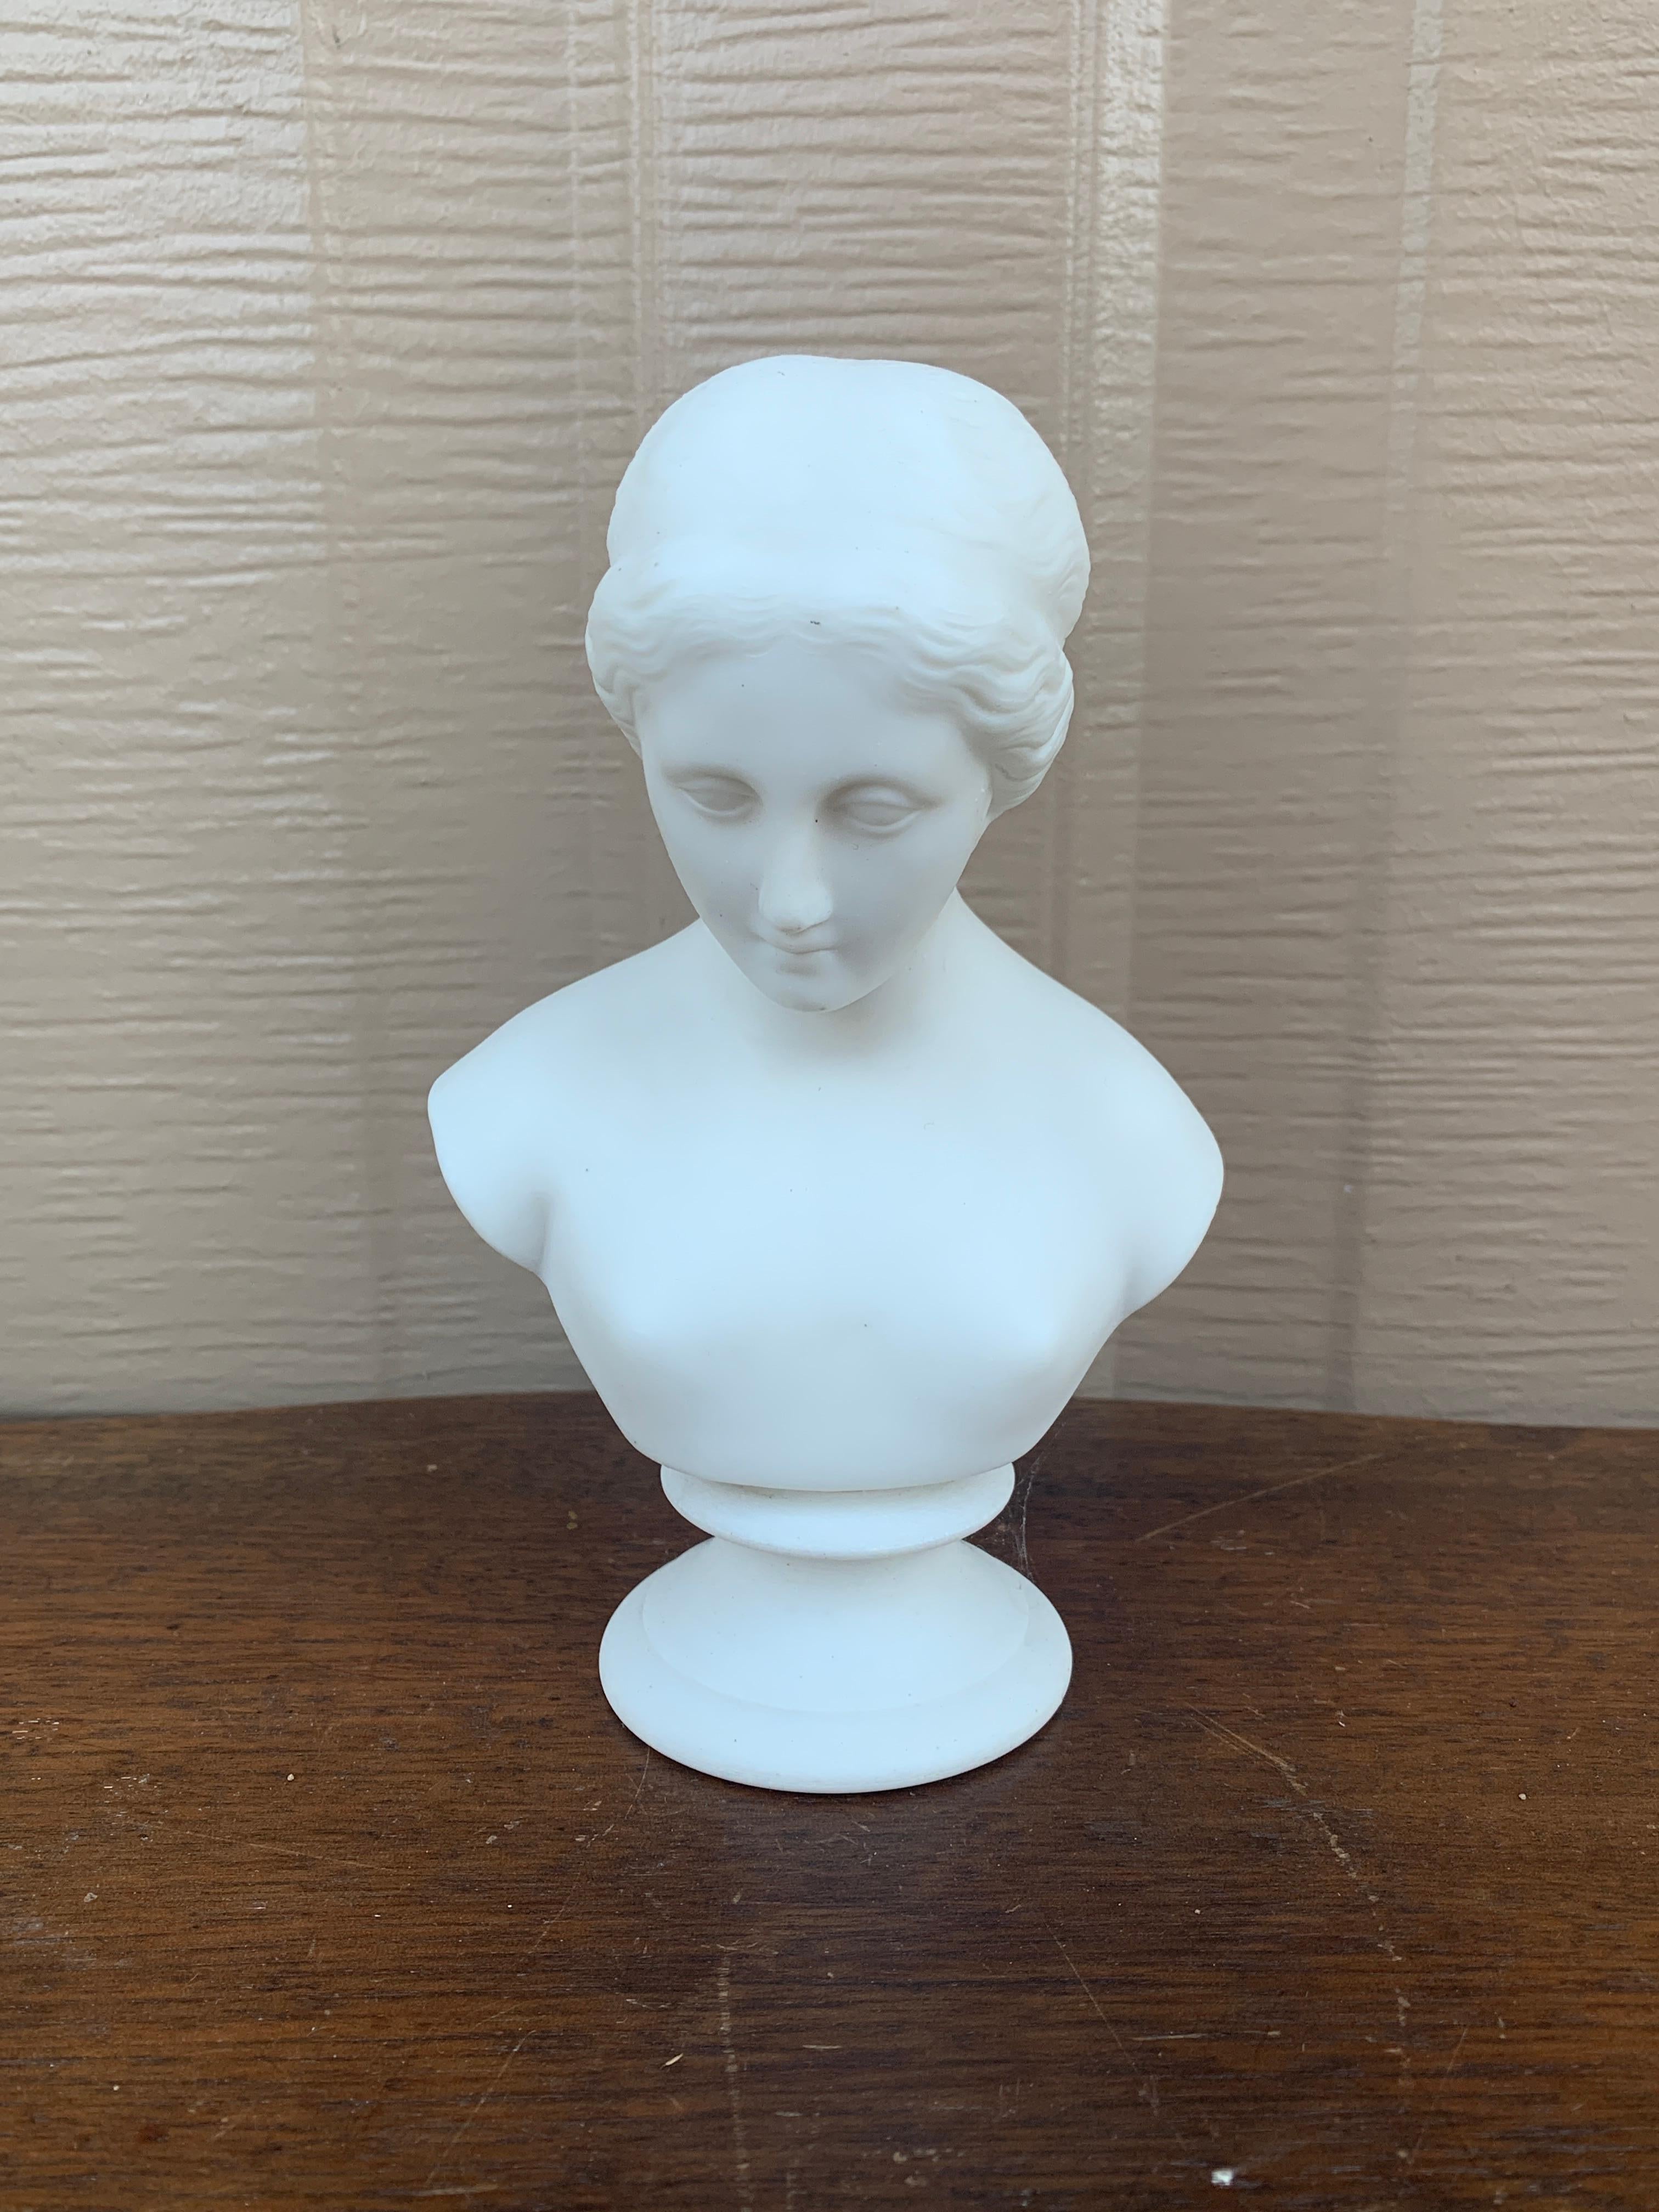 A gorgeous neoclassical style white parian porcelain female bust sculpture

USA, Mid-20th Century

Measures: 4